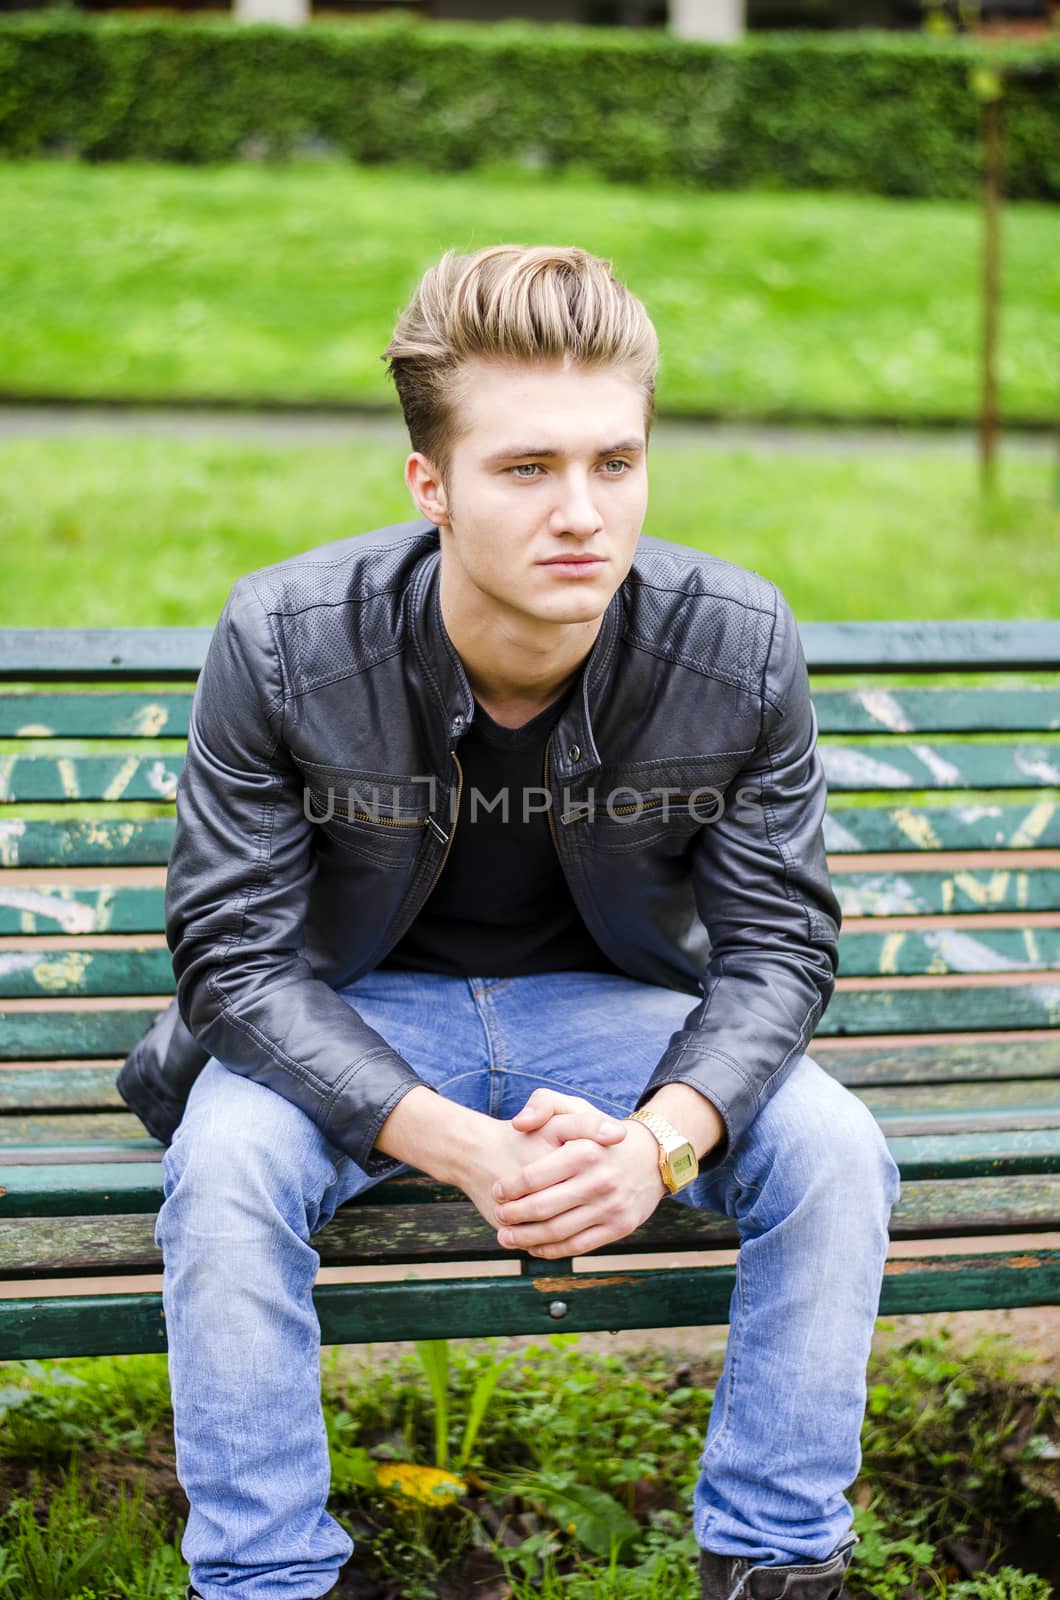 Handsome blond young man sitting on green, wooden park bench